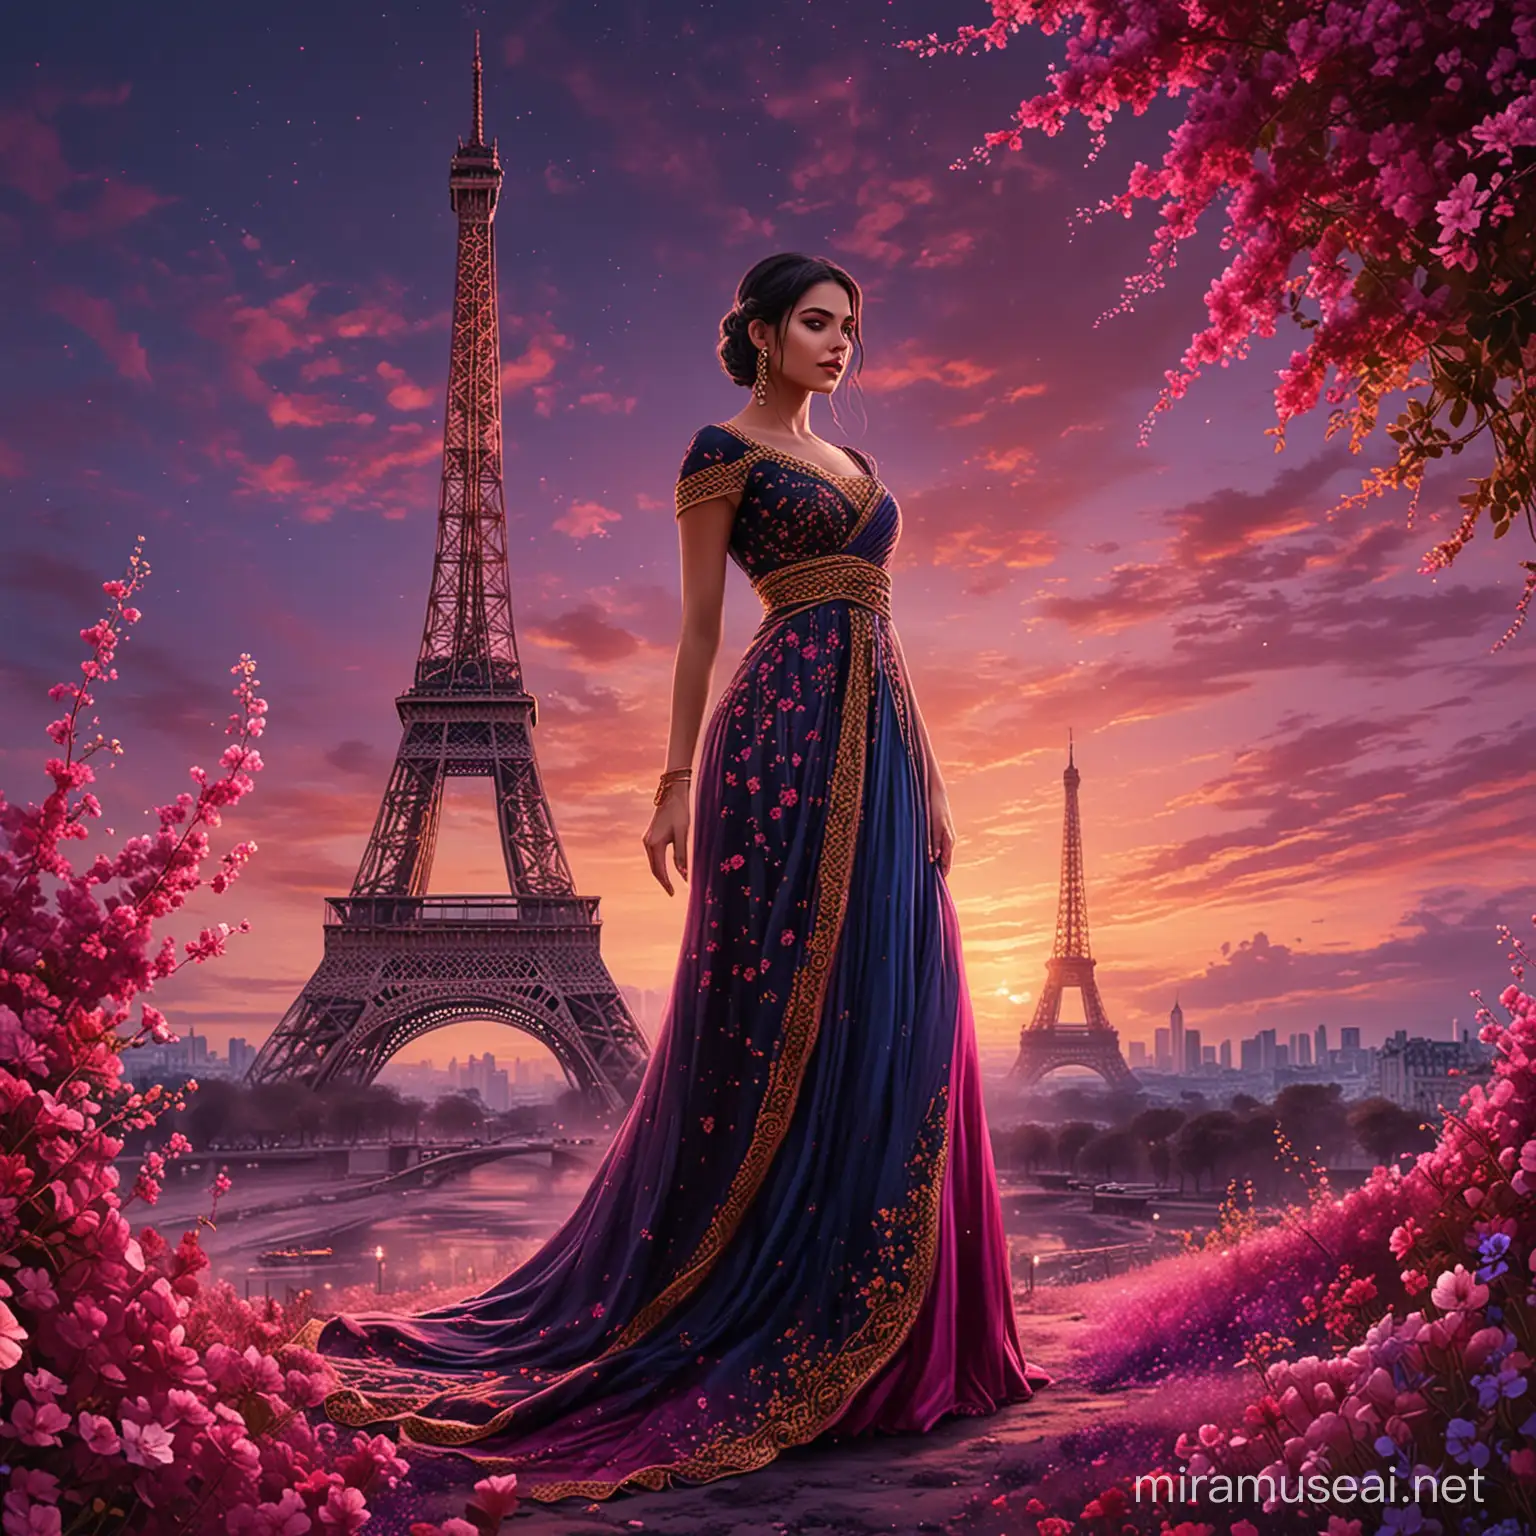 Elegant Woman in Dark Red Gown with Black Braid Amidst Purple Dust and Pink Flowers under a Pink Sky with Golden Eiffel Tower